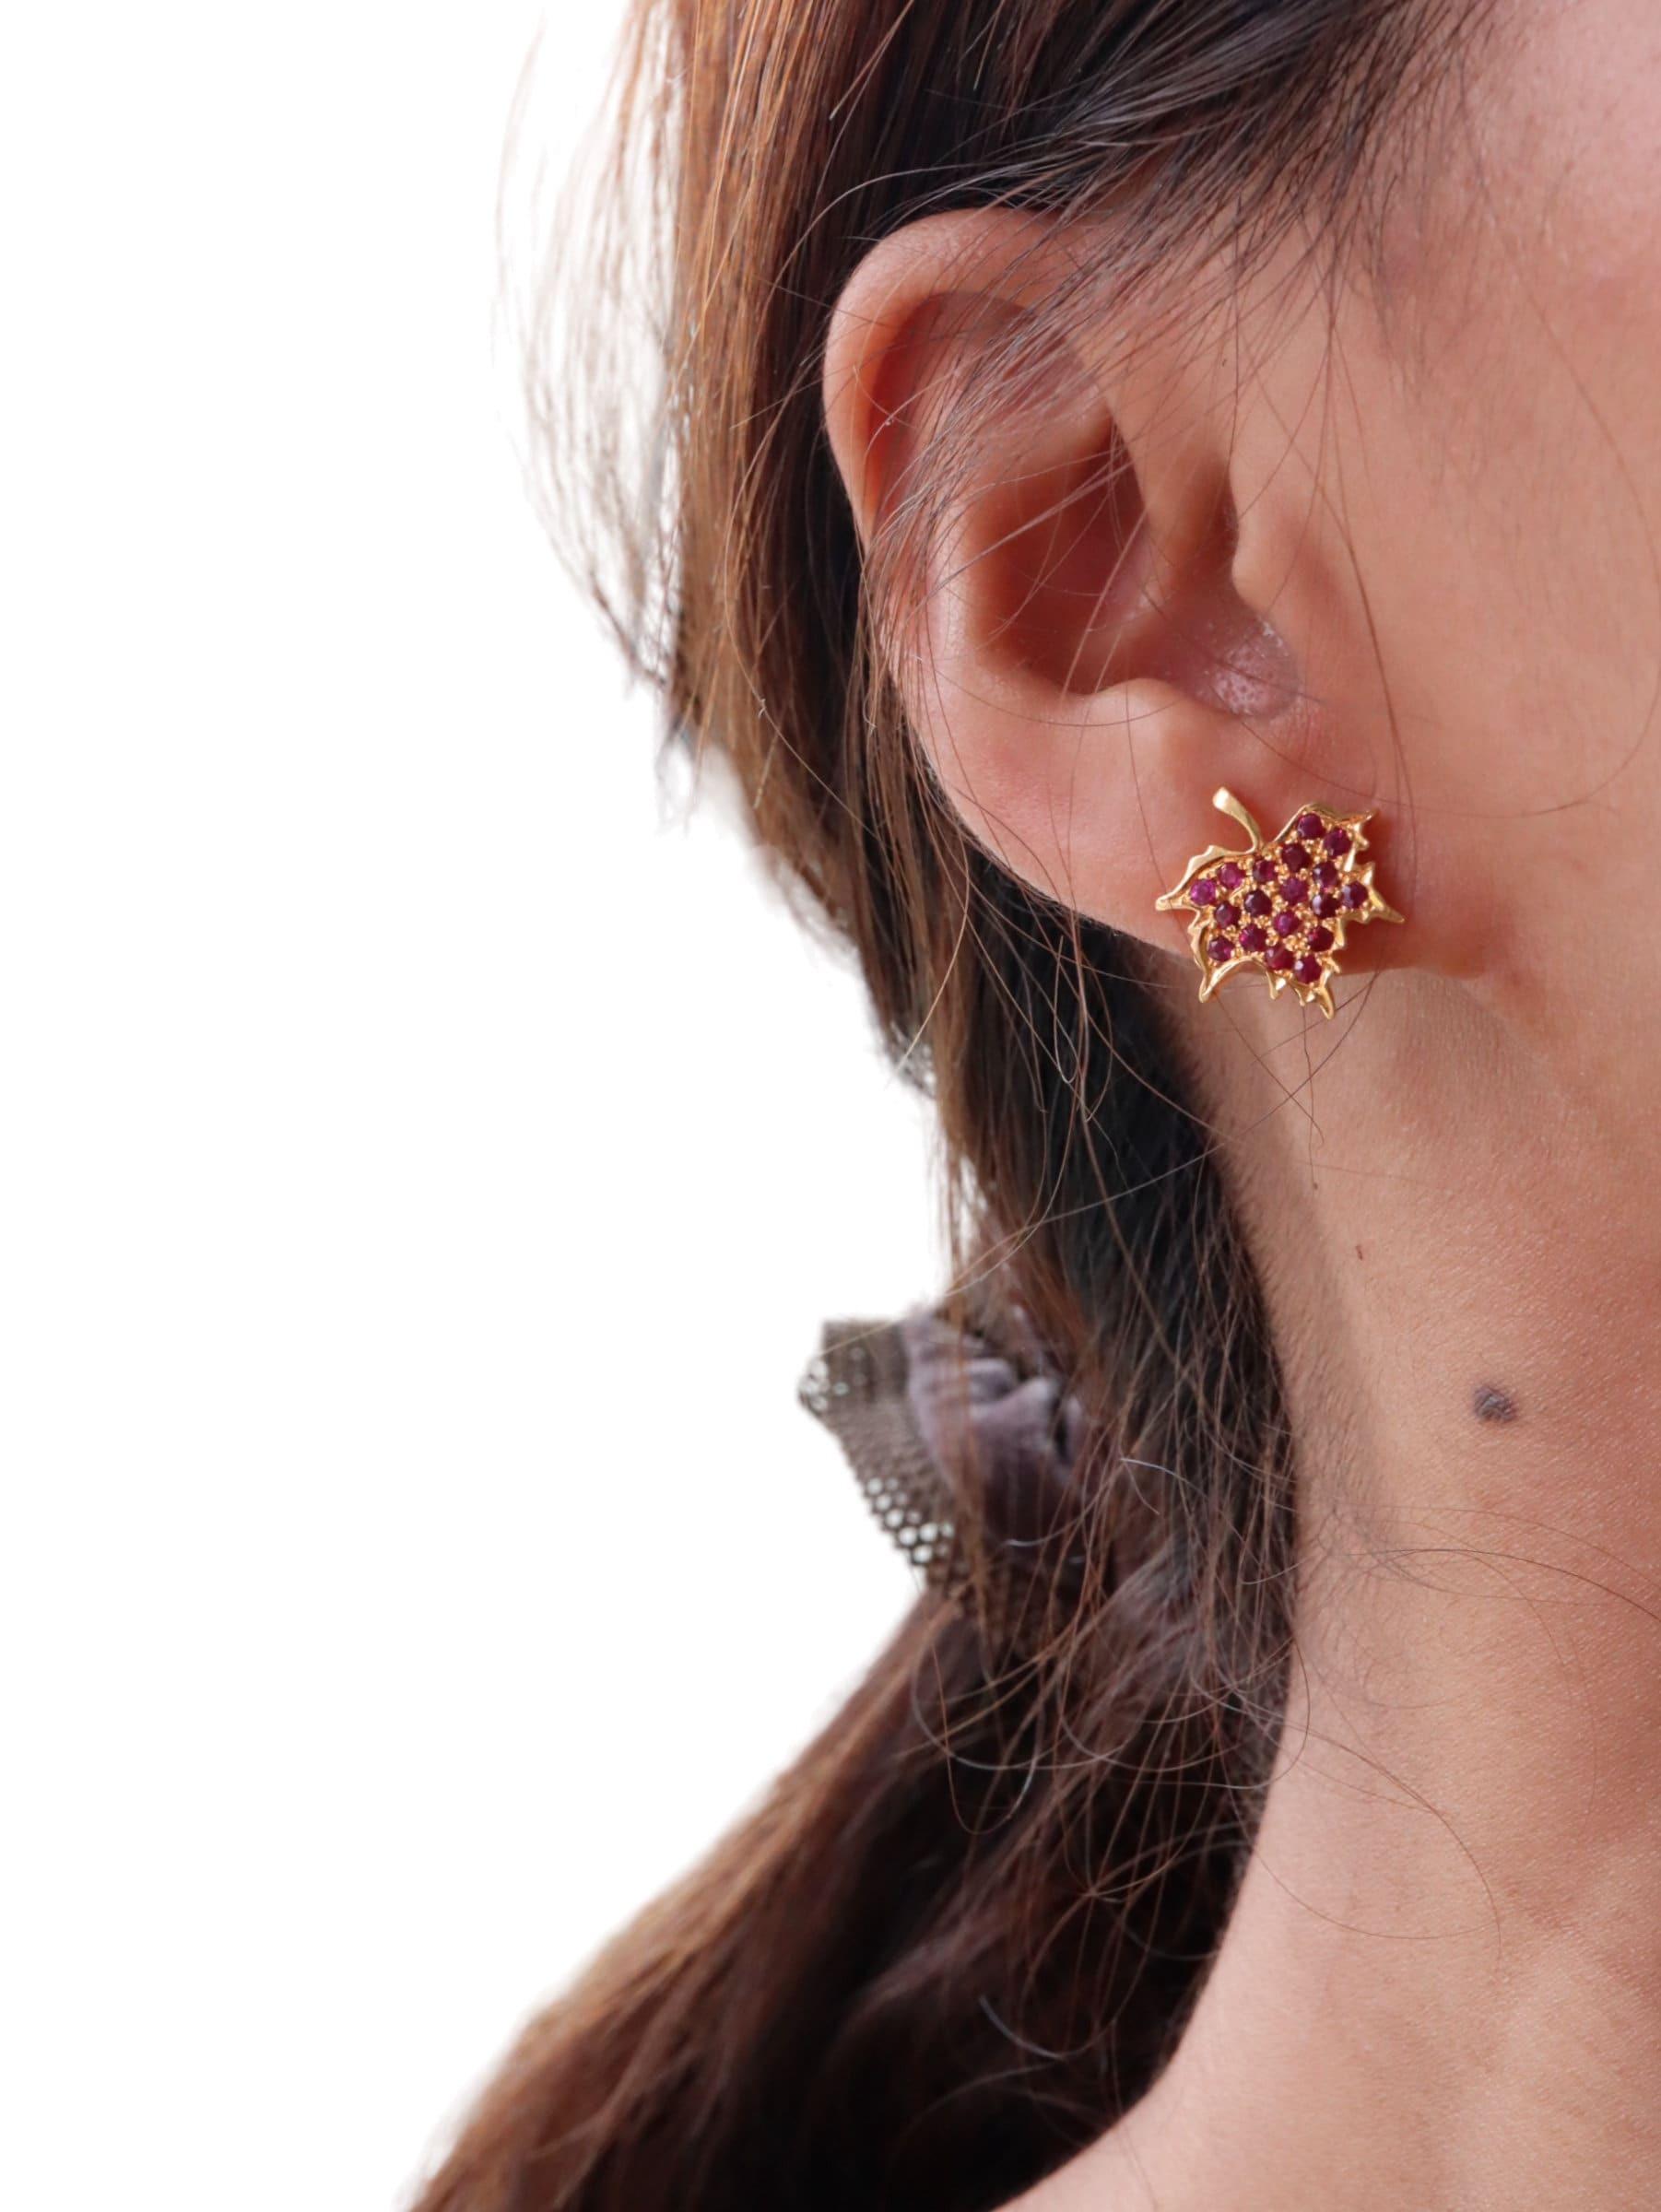 The maple leaf is often associated with autumn, symbolizing a warm and cozy relationship. It may represent a deep friendship or a sense of familiarity, akin to the bond between old friends or family members.

This maple leaf-designed earring is